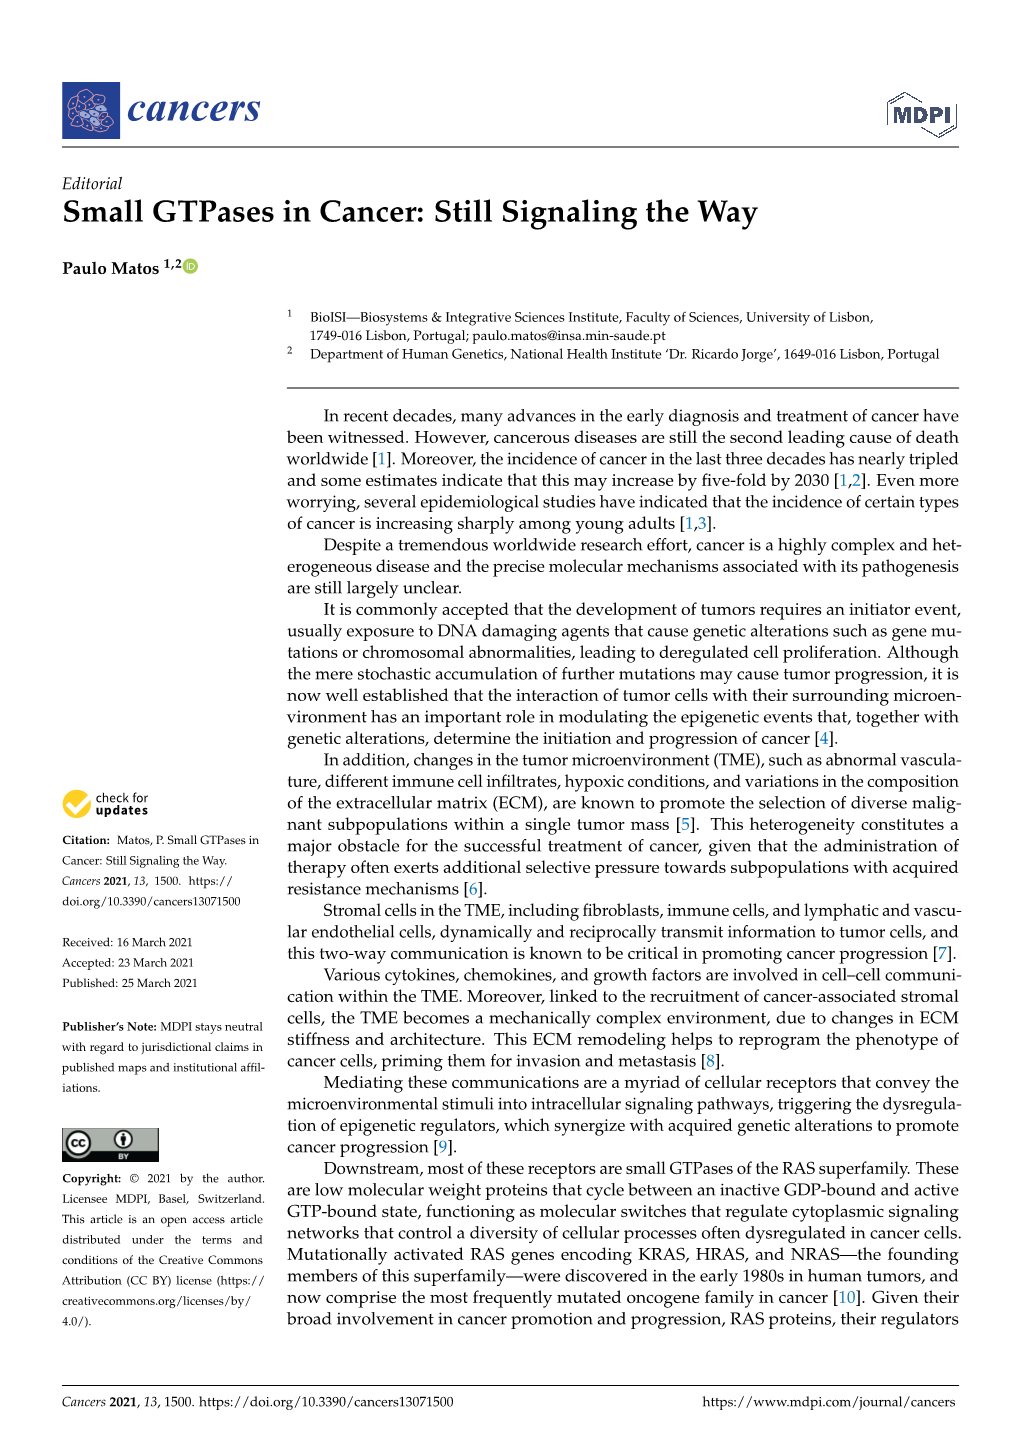 Small Gtpases in Cancer: Still Signaling the Way